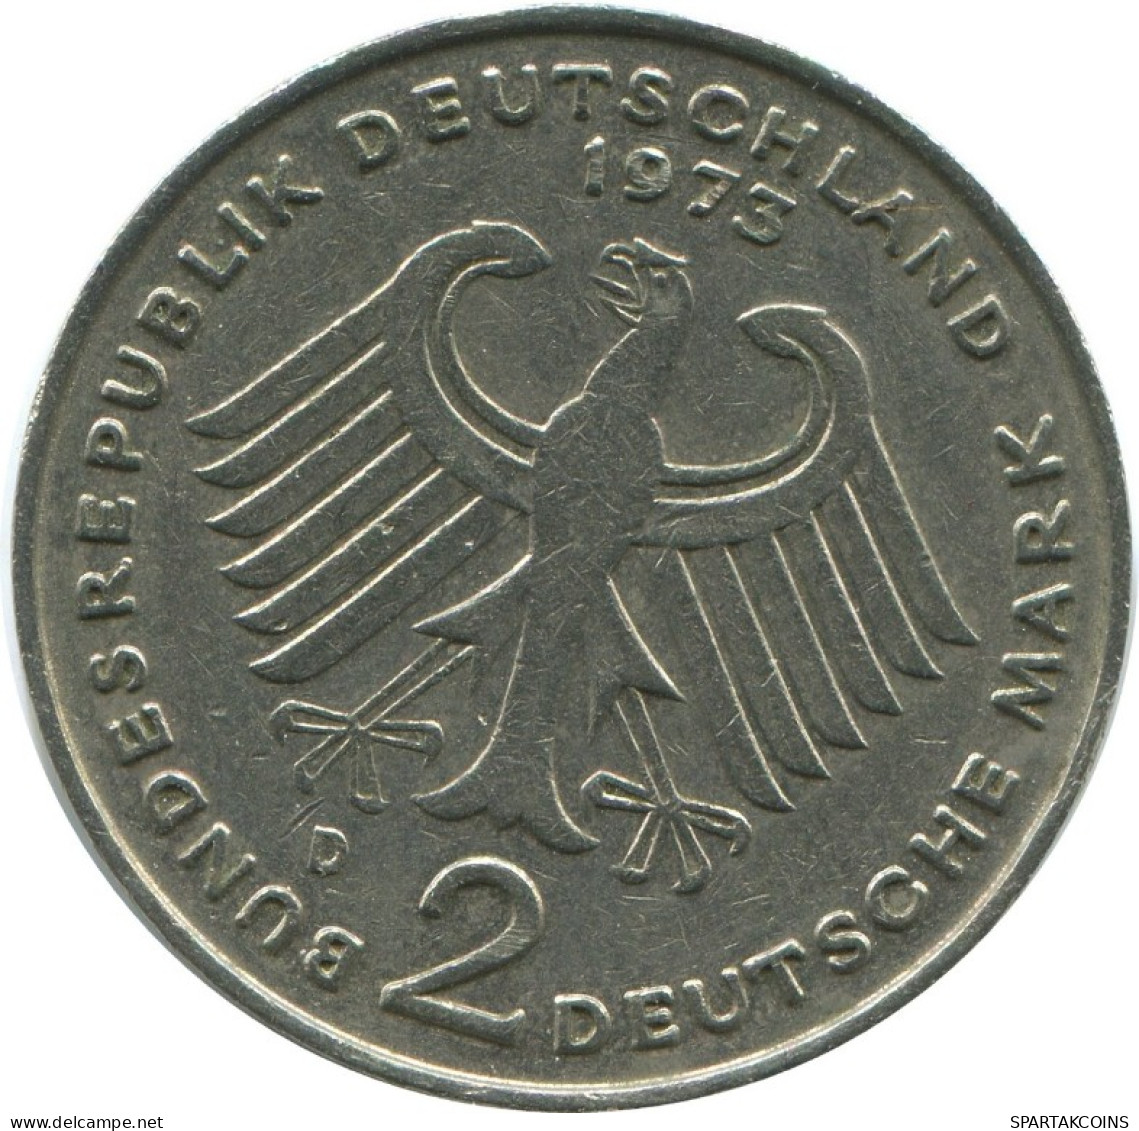 2 DM 1973 D T.HEUSS WEST & UNIFIED GERMANY Coin #AG236.3.U.A - 2 Marcos